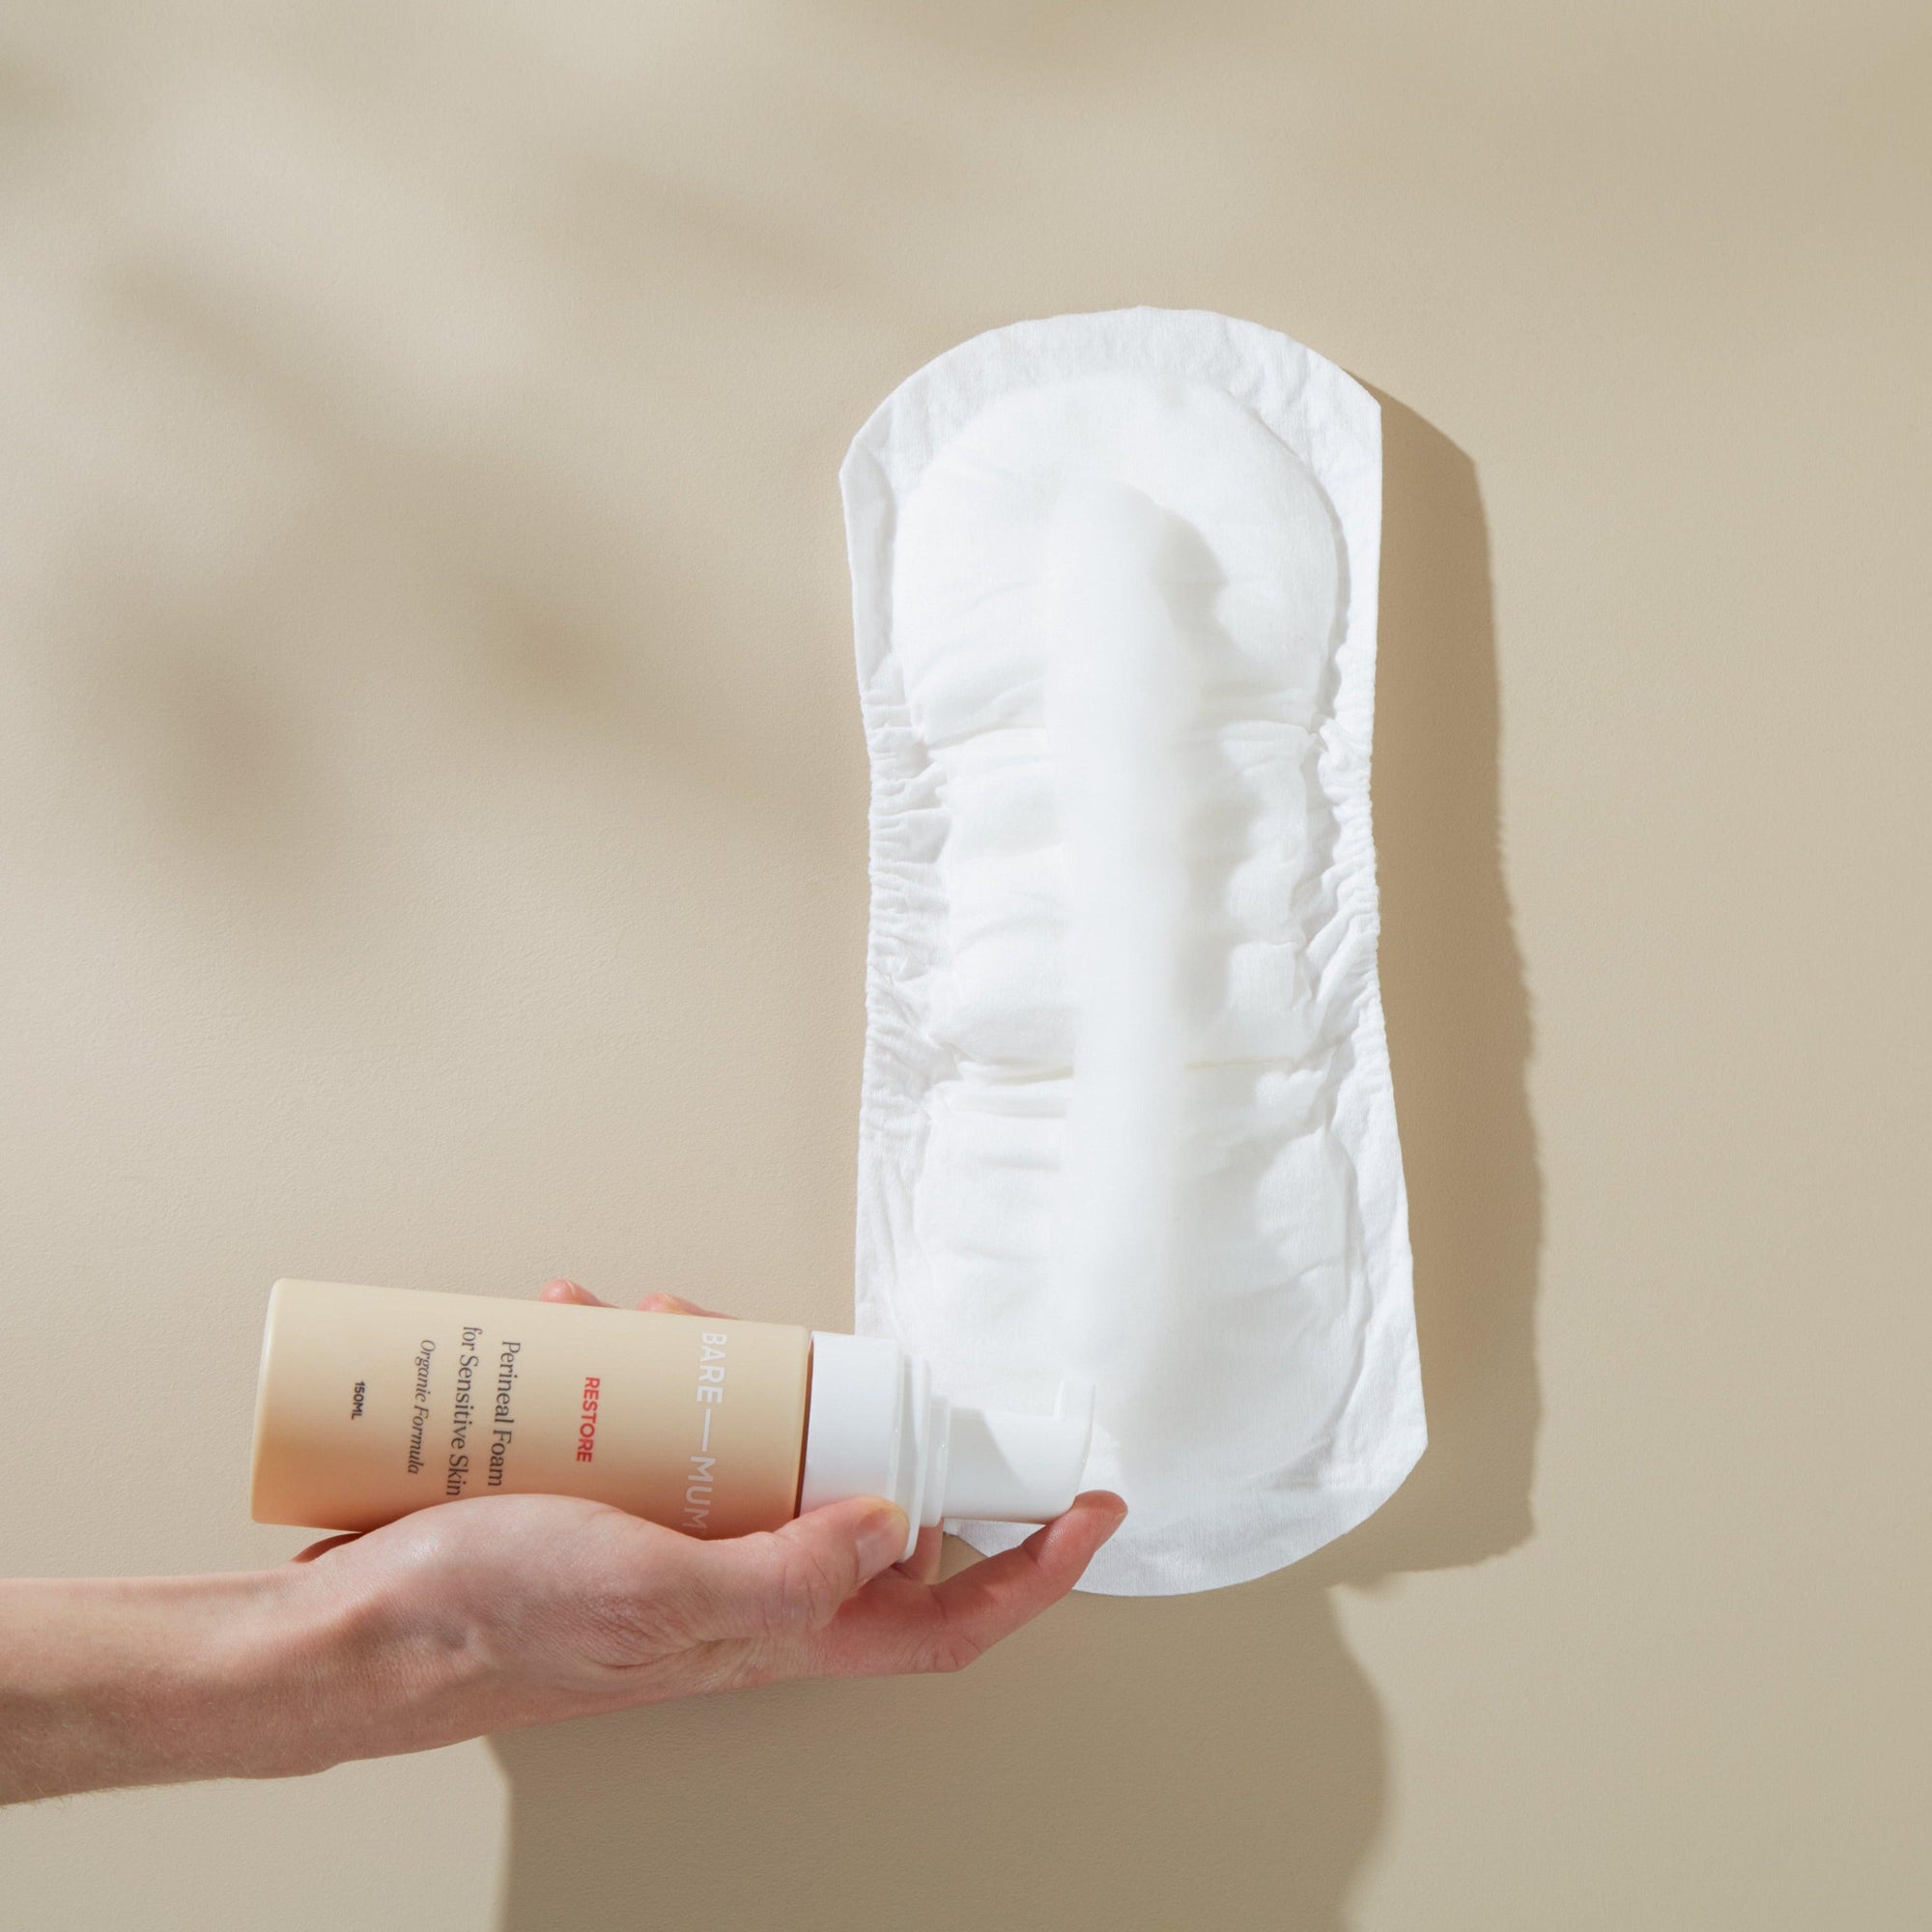 A gentle foam that effectively absorbs into sensitive skin (not the pad) to soothe irritation and ease discomfort associated with childbirth. This concentrated, non-rinse formula is pH balancing and made without harmful chemicals or fragrances to clean and comfort the delicate perineum area.